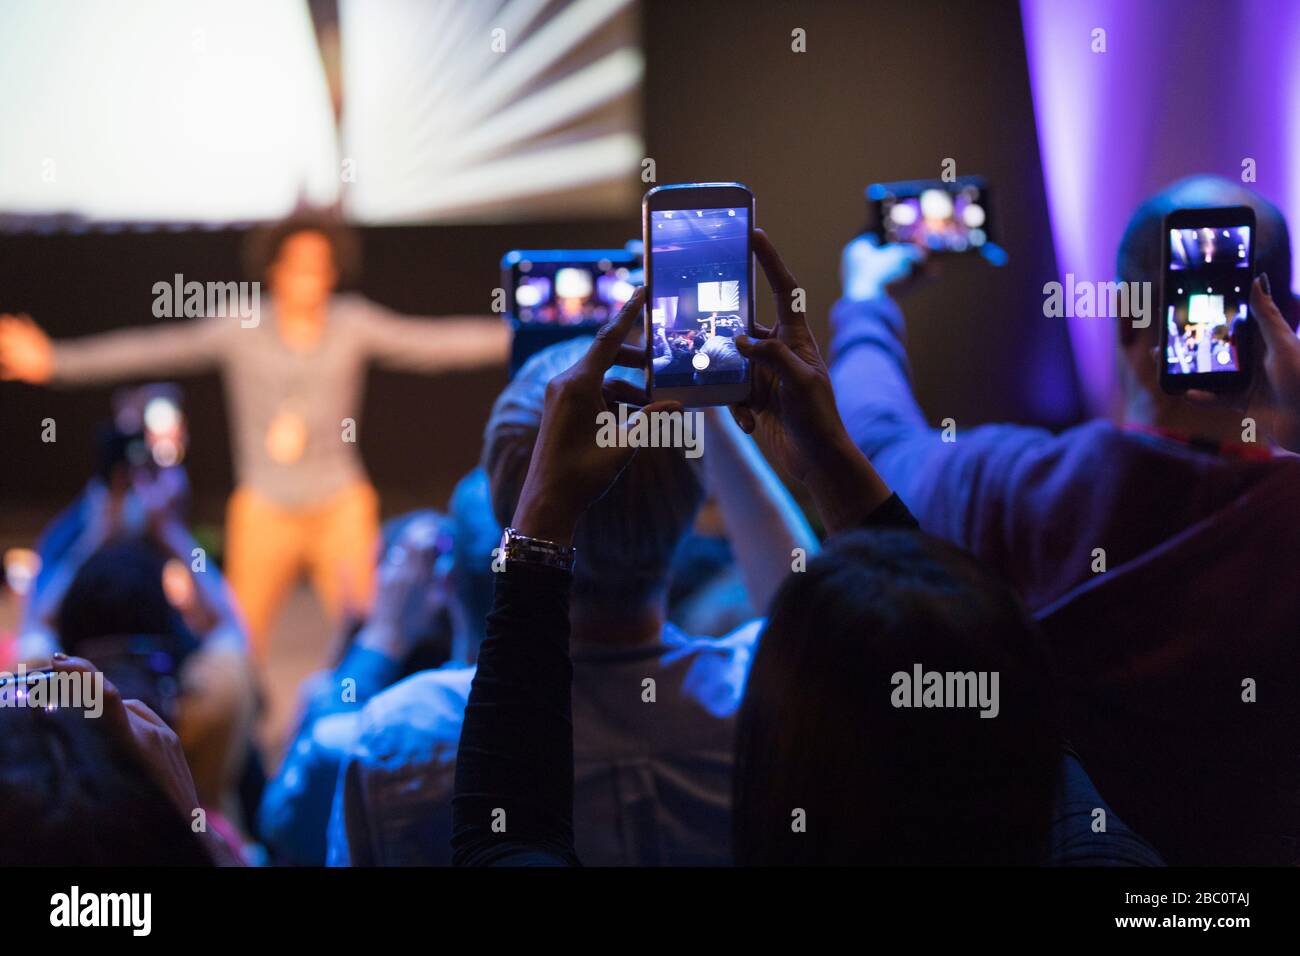 Audience with camera phones photographing speaker on stage Stock Photo